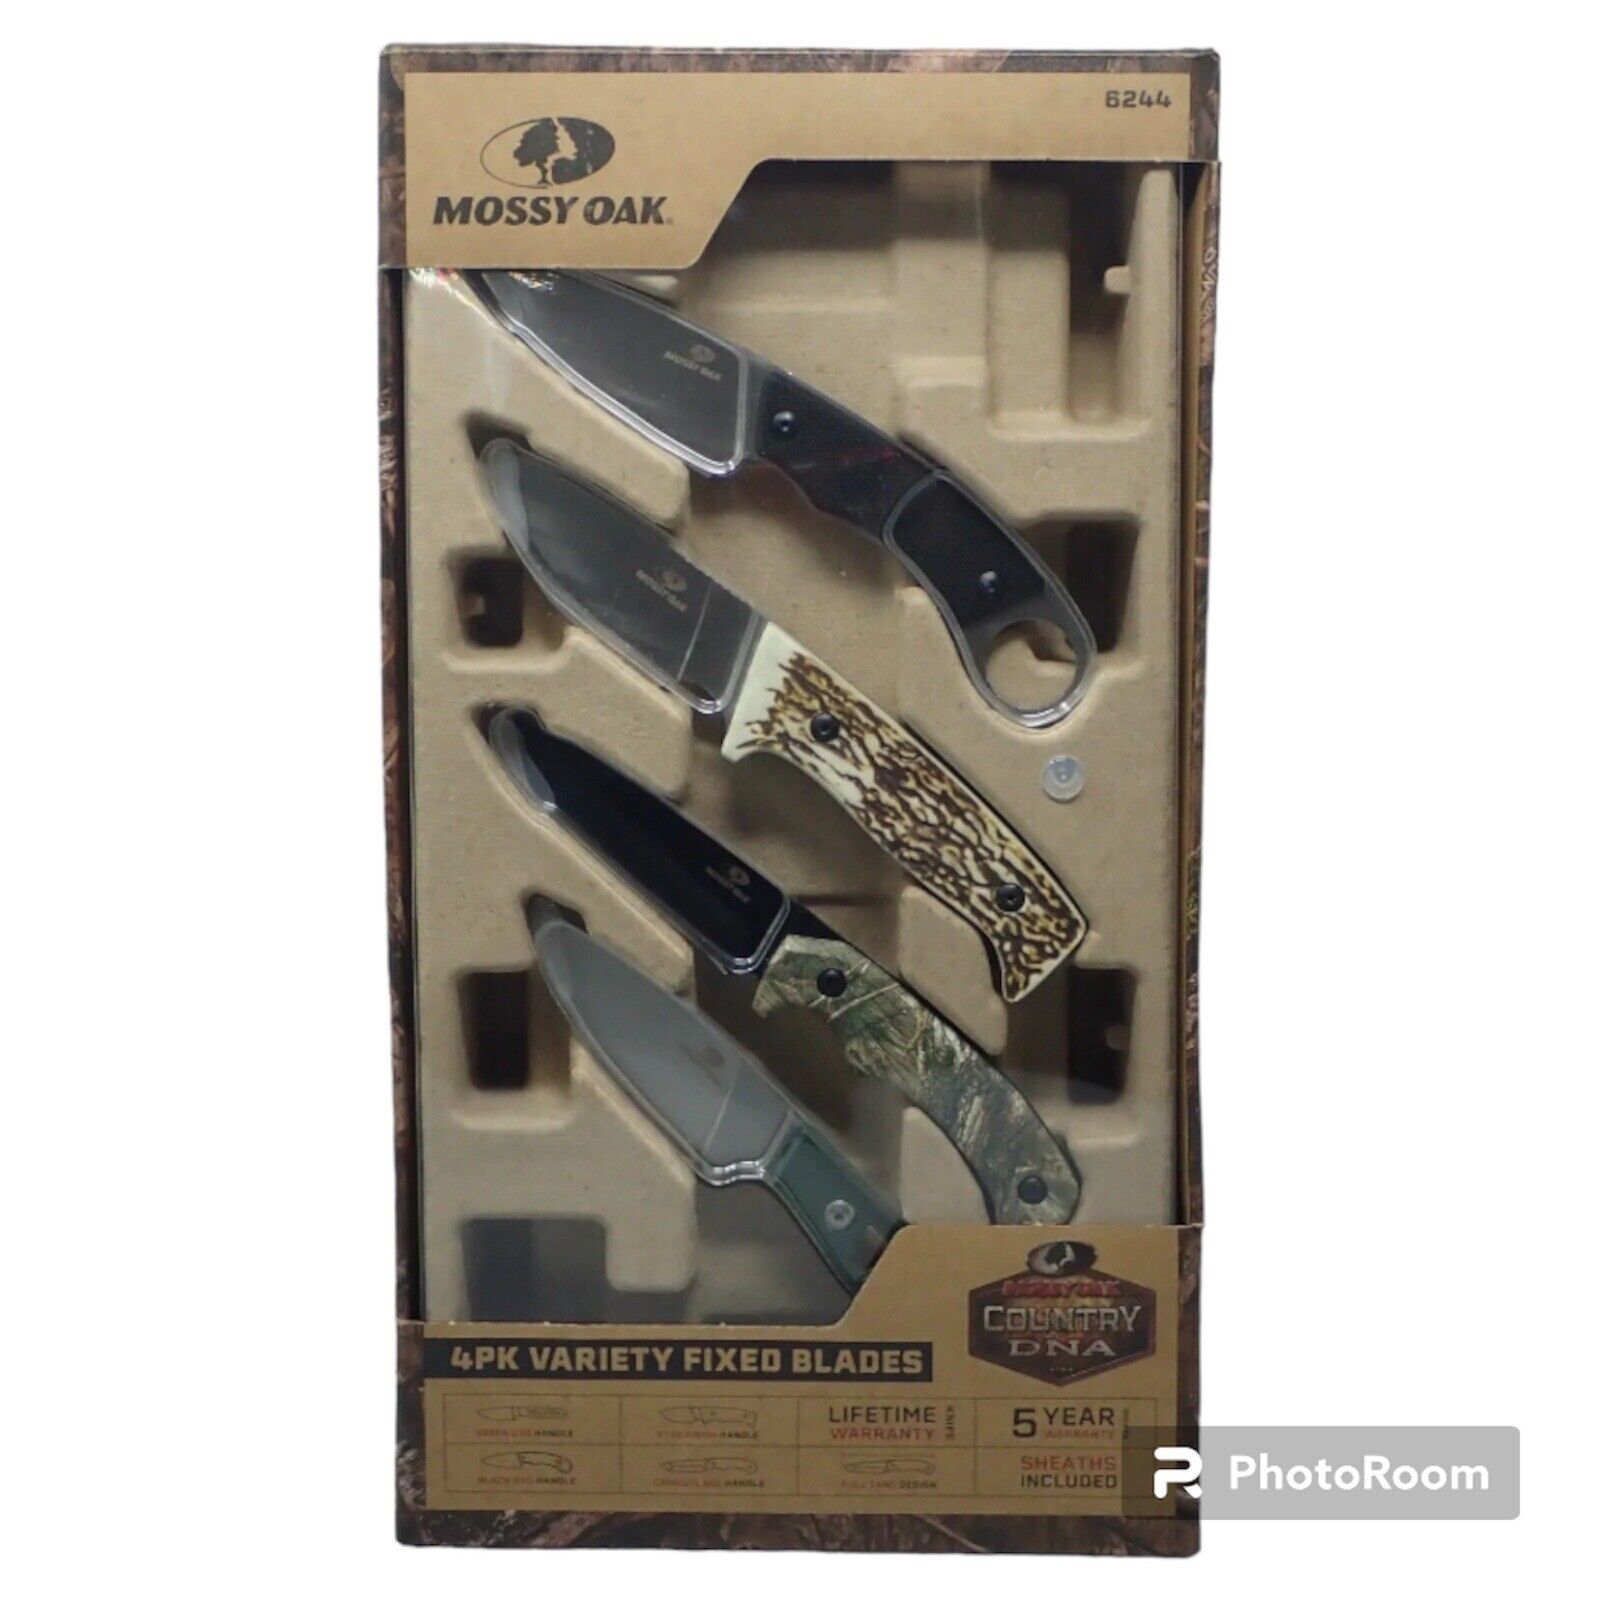 NEW Mossy Oak 4 pack Variety Fixed Blade Knife Box Gift Set with Sheaths 7 Inch